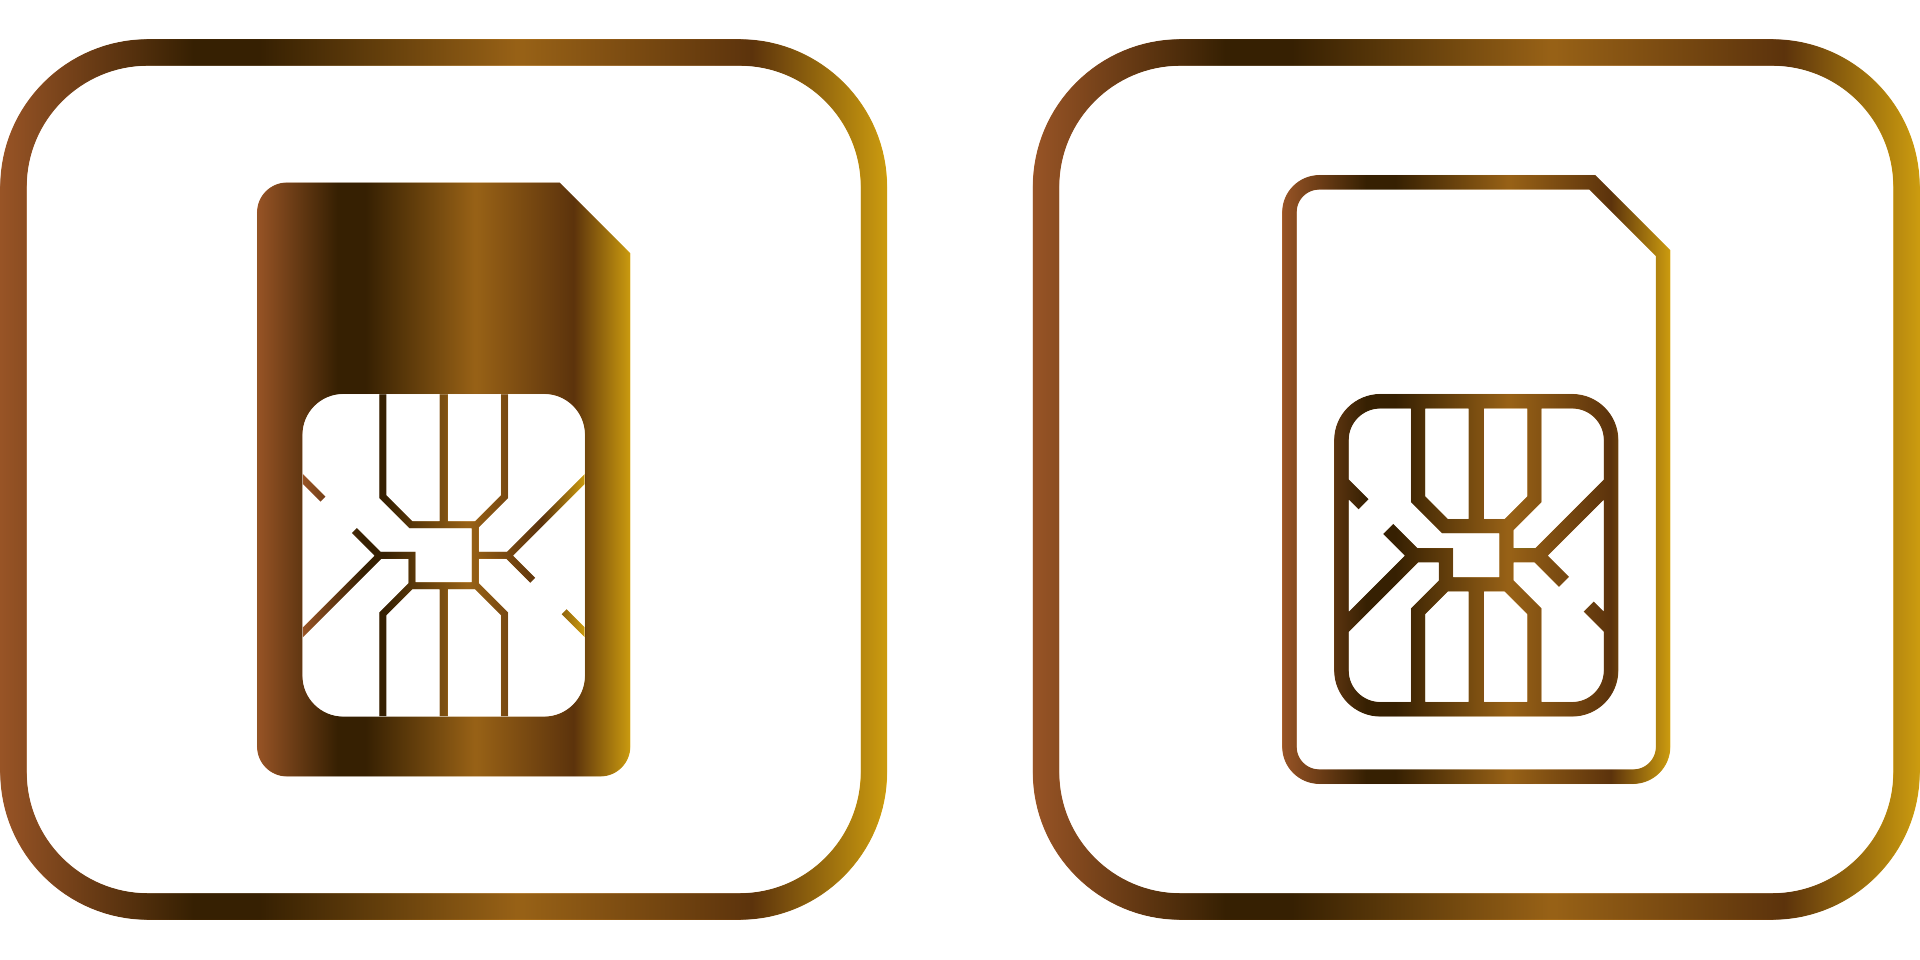 a simple picture of a sim card on the left and the right with the right one having more golden colour for describing the advantages of an esim